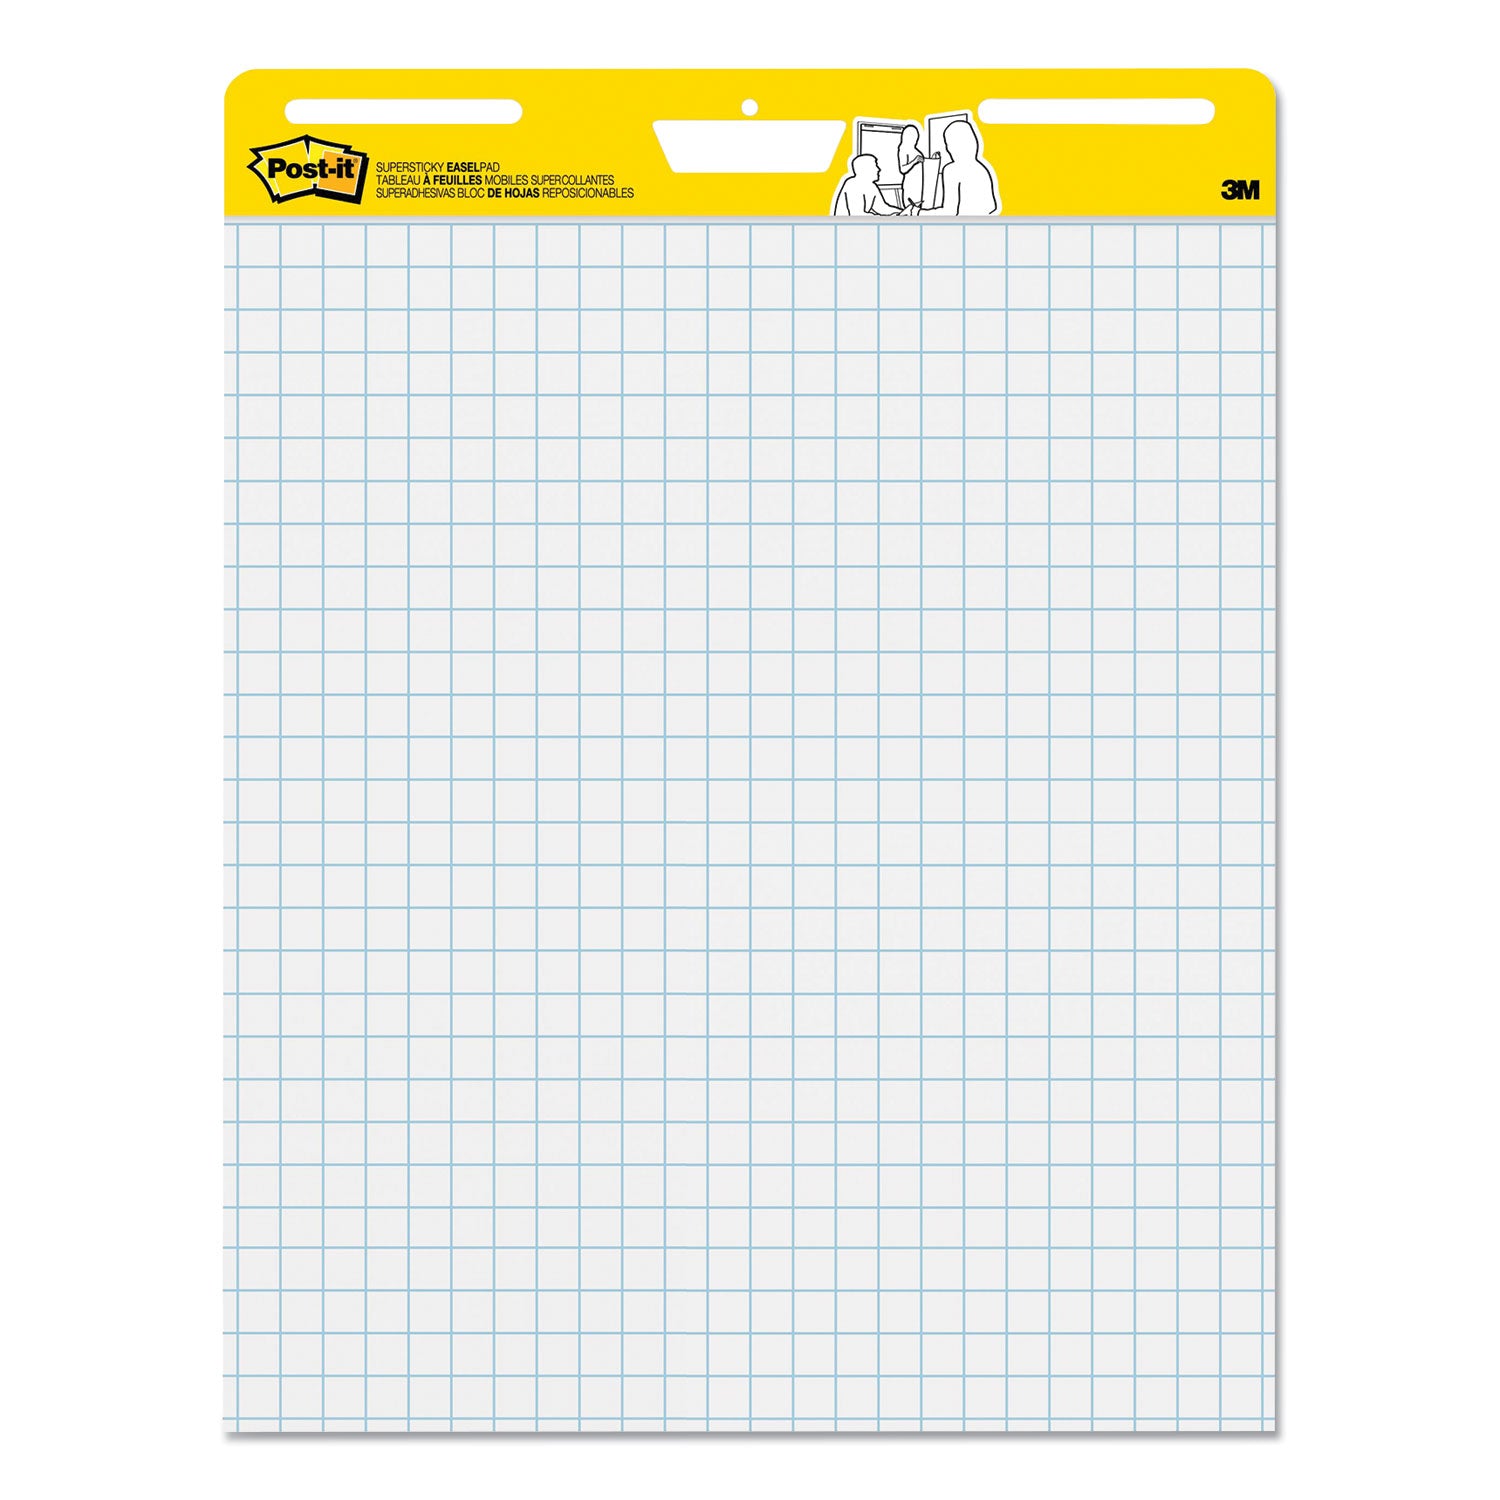 vertical-orientation-self-stick-easel-pads-quadrille-rule-1-sq-in-25-x-30-white-30-sheets-6-pack_mmm560vad6pk - 3